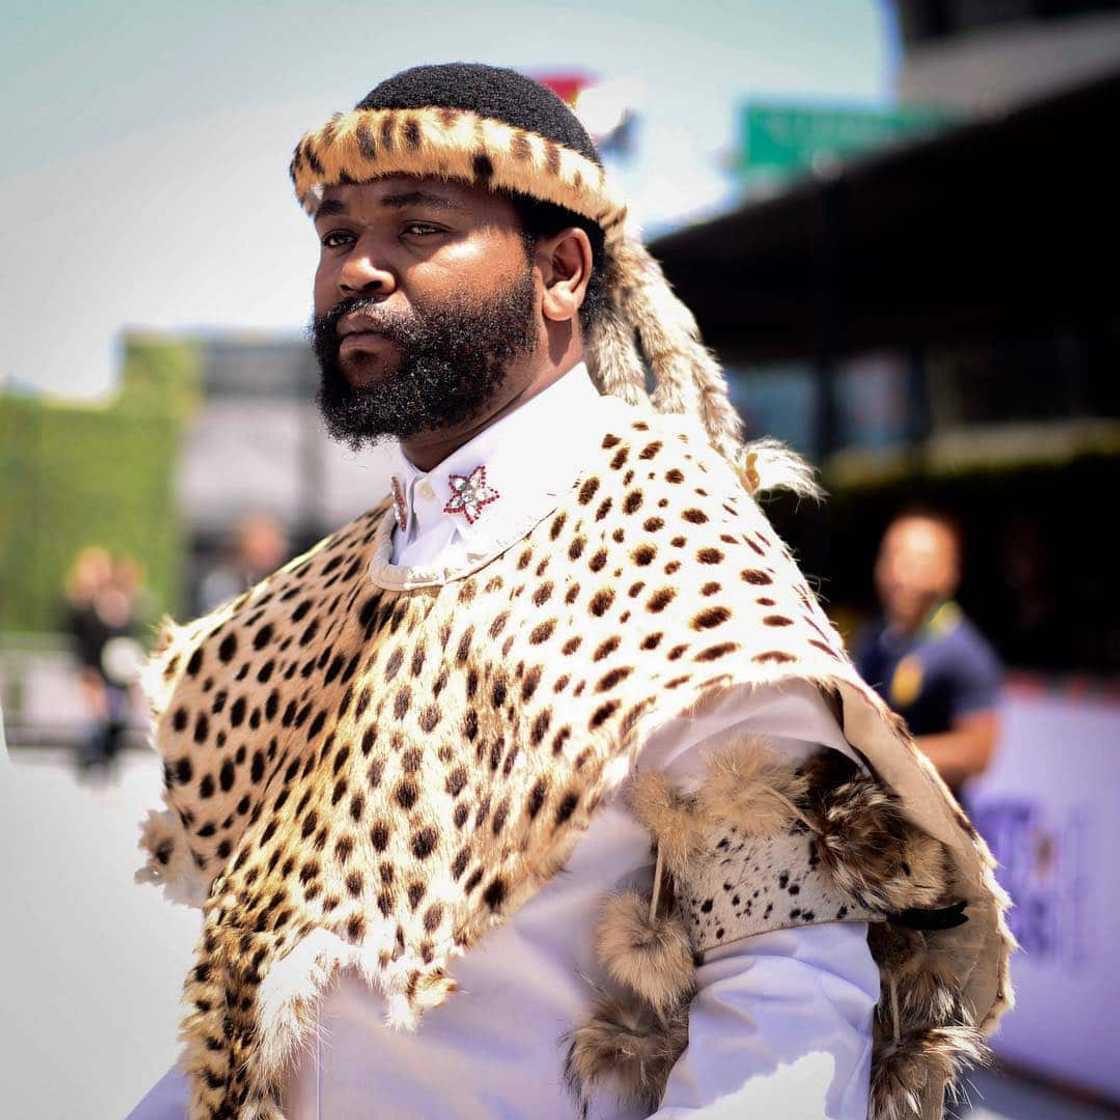 Sjava biography: age, real name, songs, albums and profile